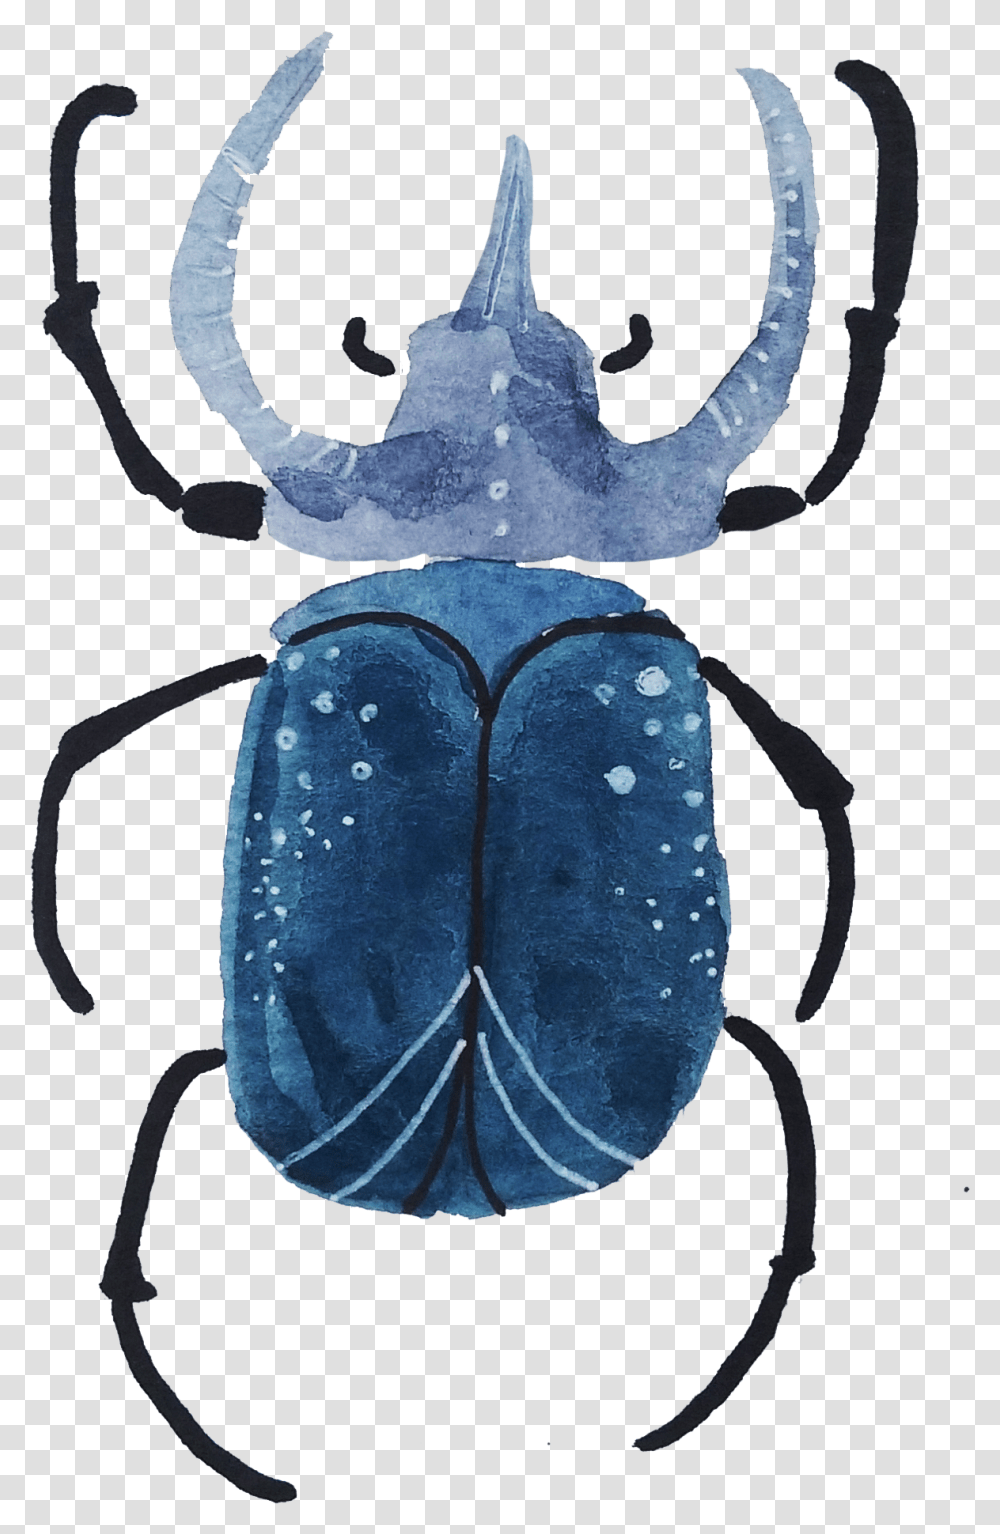 Download With Both Watercolors And Gouache Dung Beetle Dung Beetle, Insect, Invertebrate, Animal, Ant Transparent Png